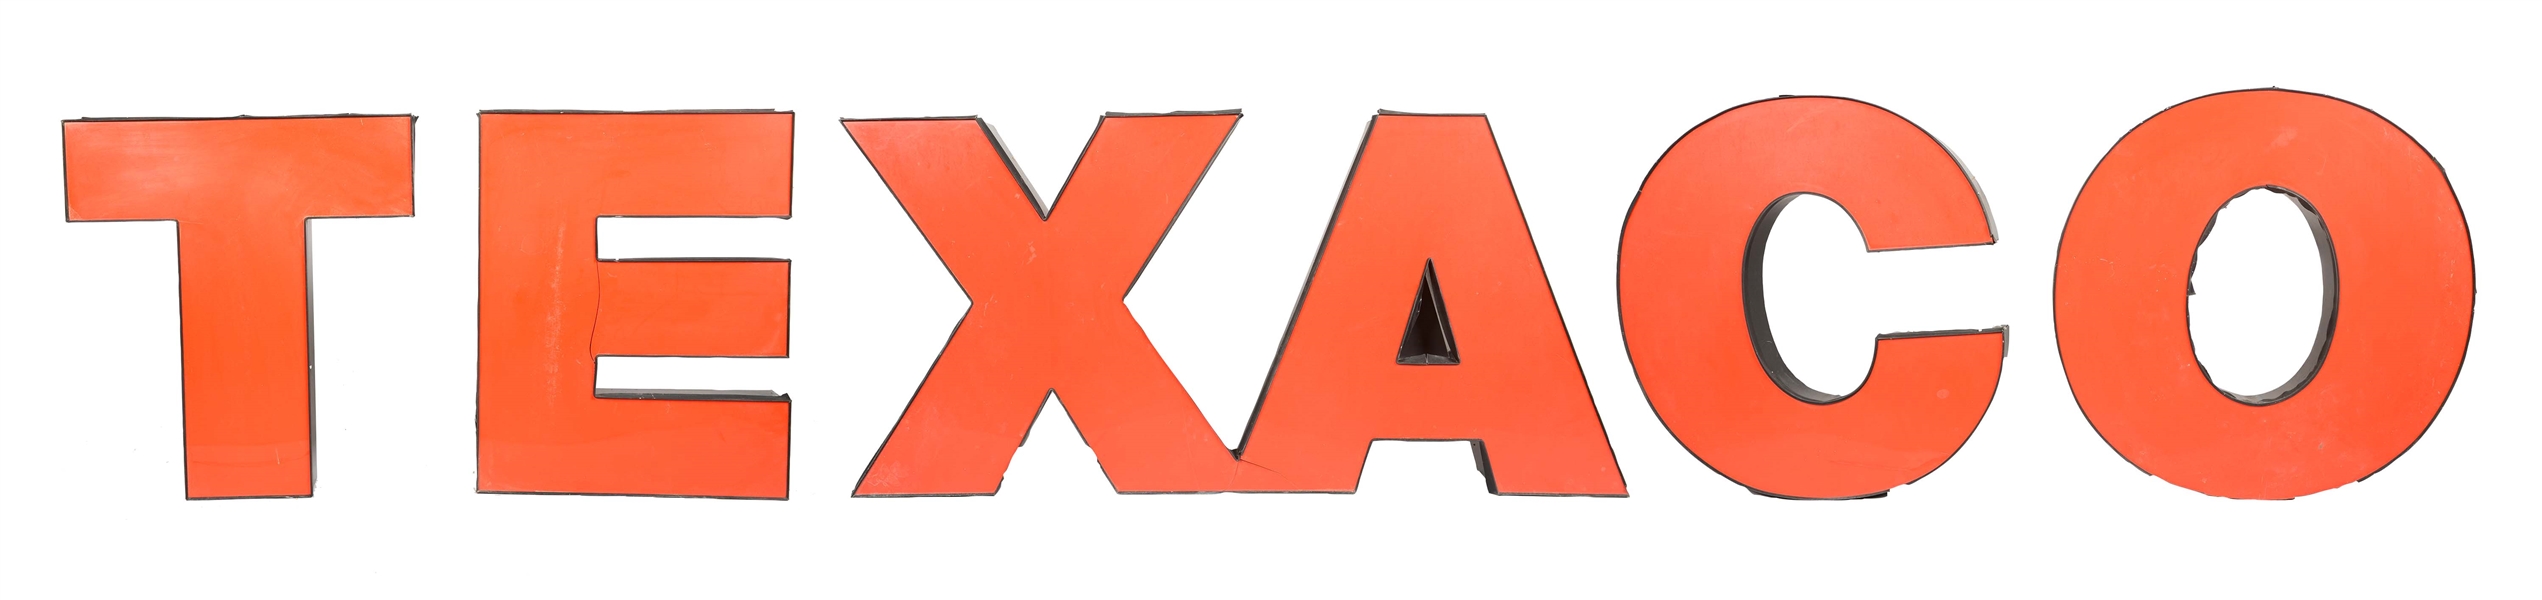 LARGE TEXACO PLASTIC FRONT CHANNEL LETTERS SIGN.